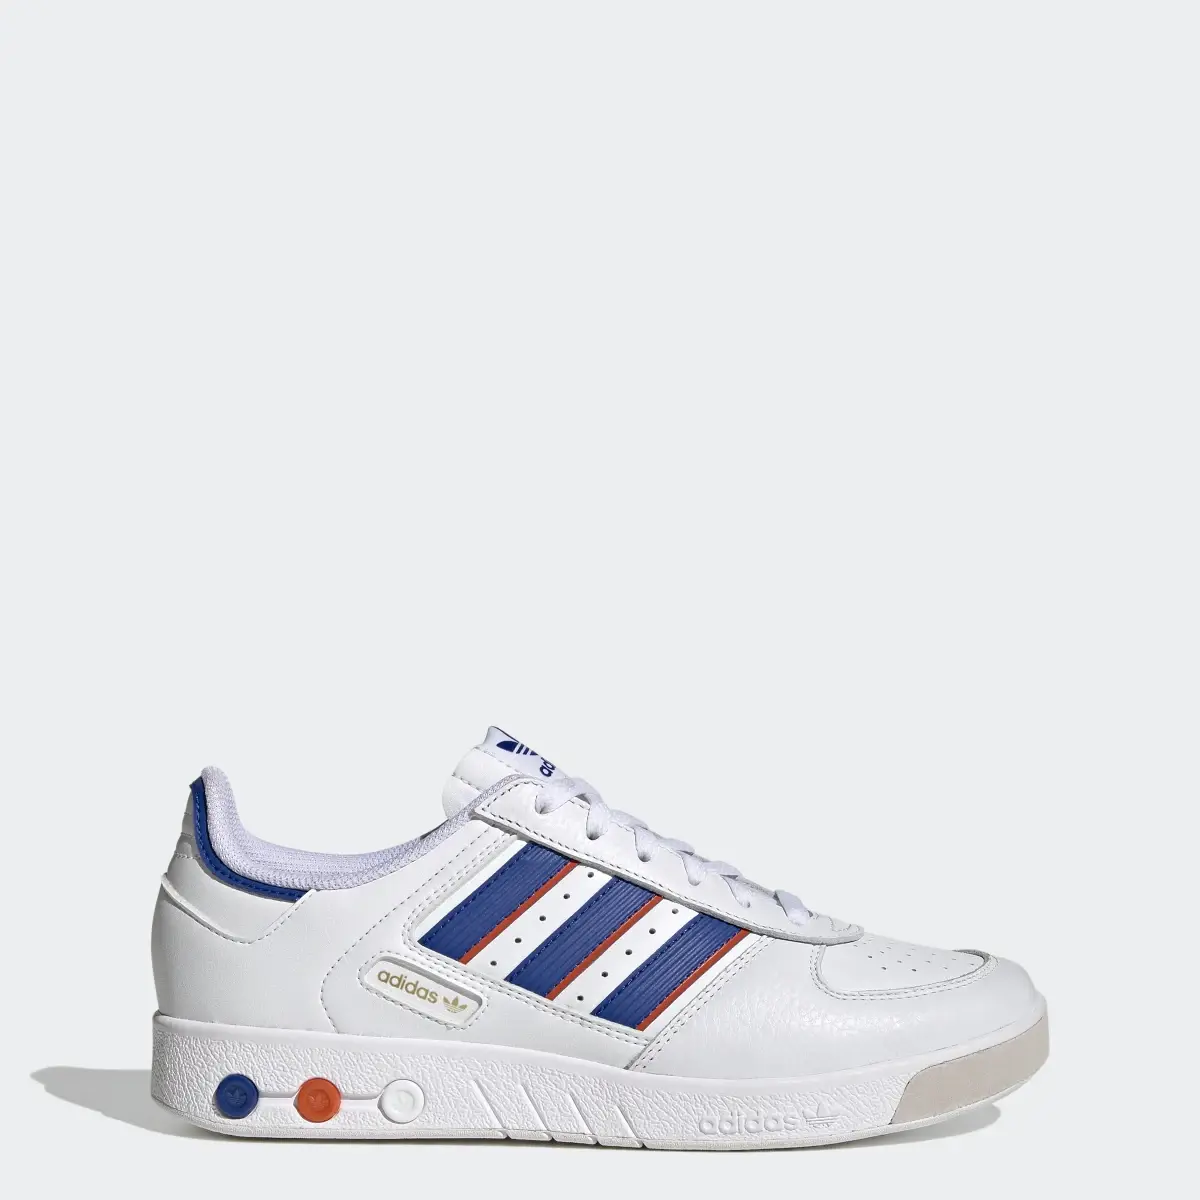 Adidas G.S. Court Shoes. 1